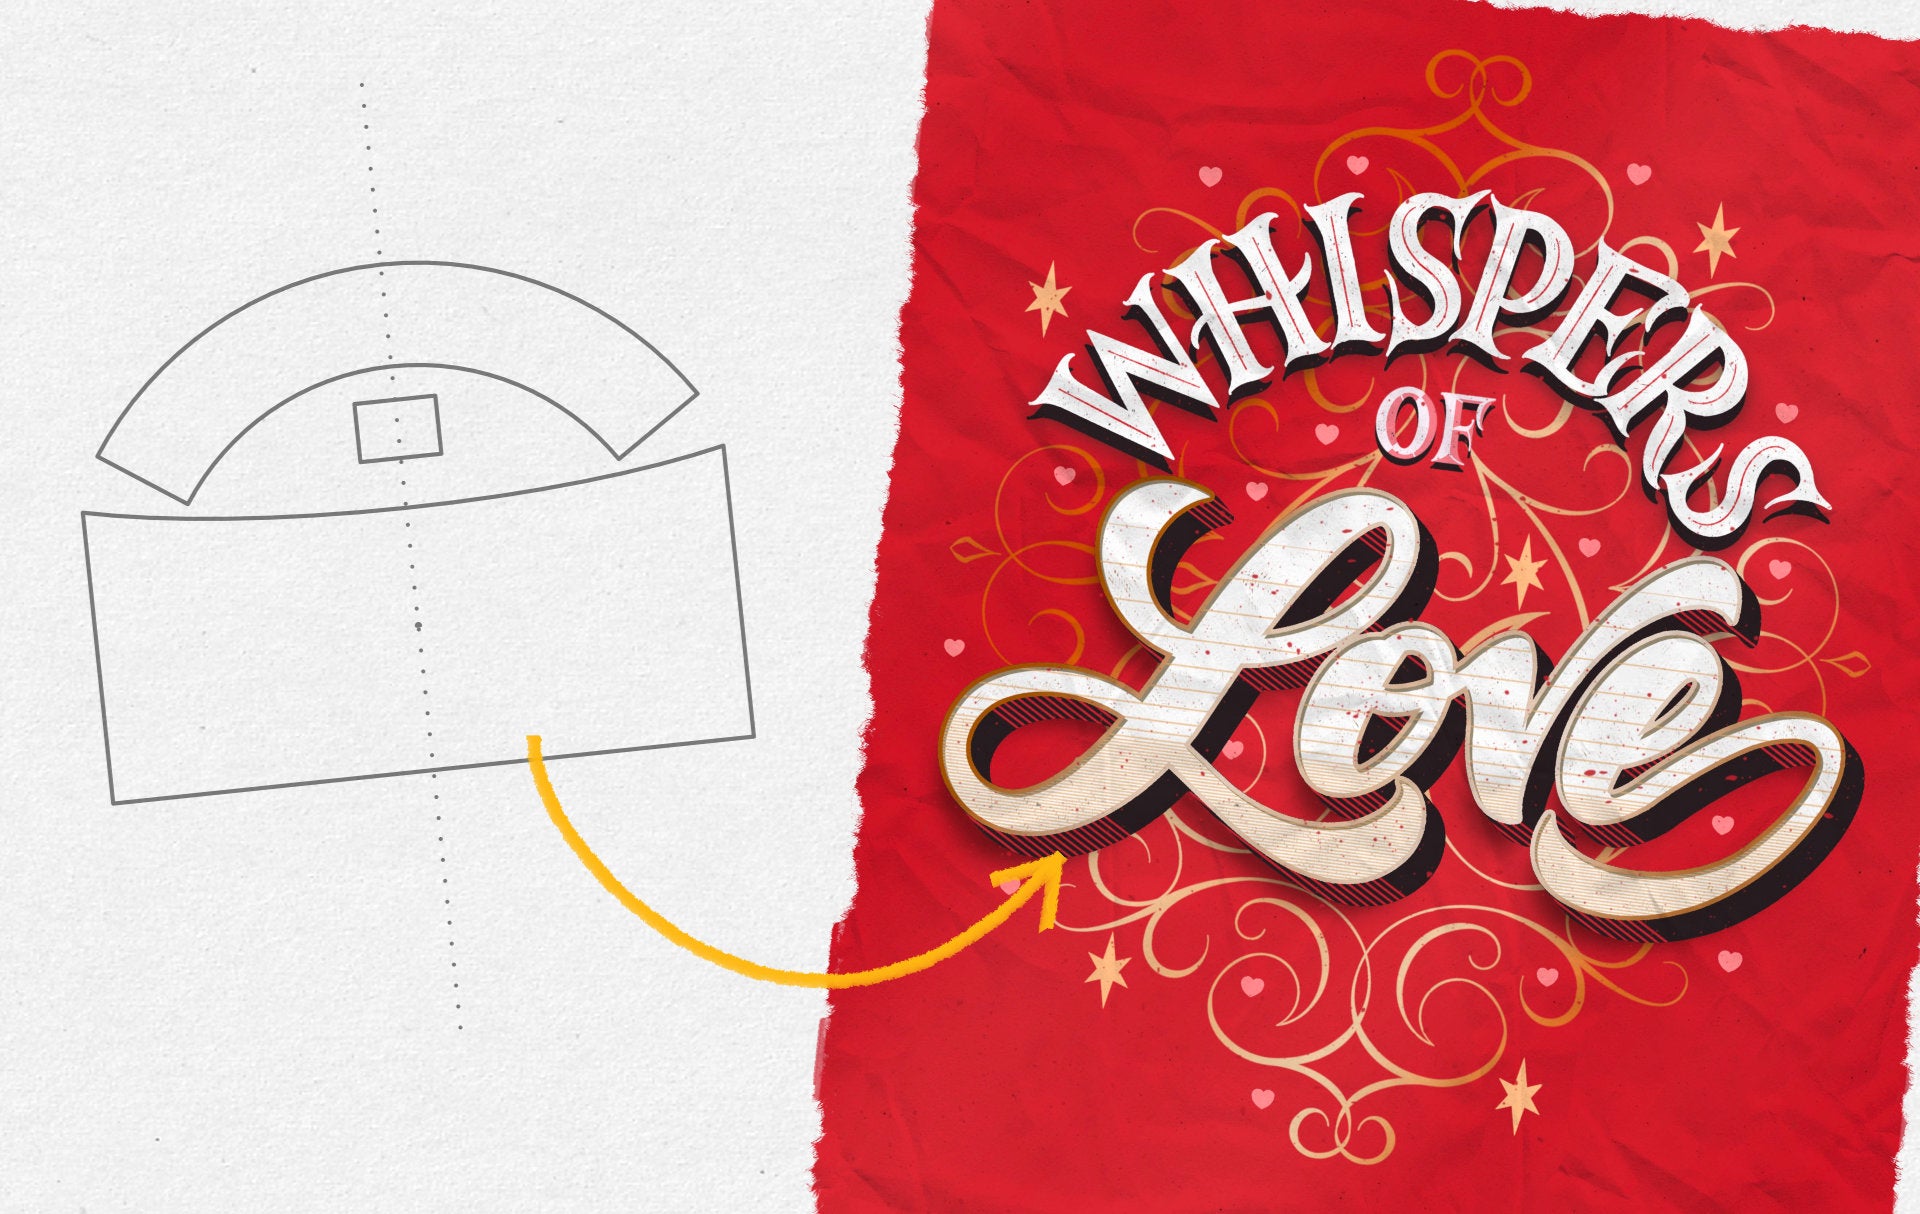 "Whispers of Love" Lettering Templates